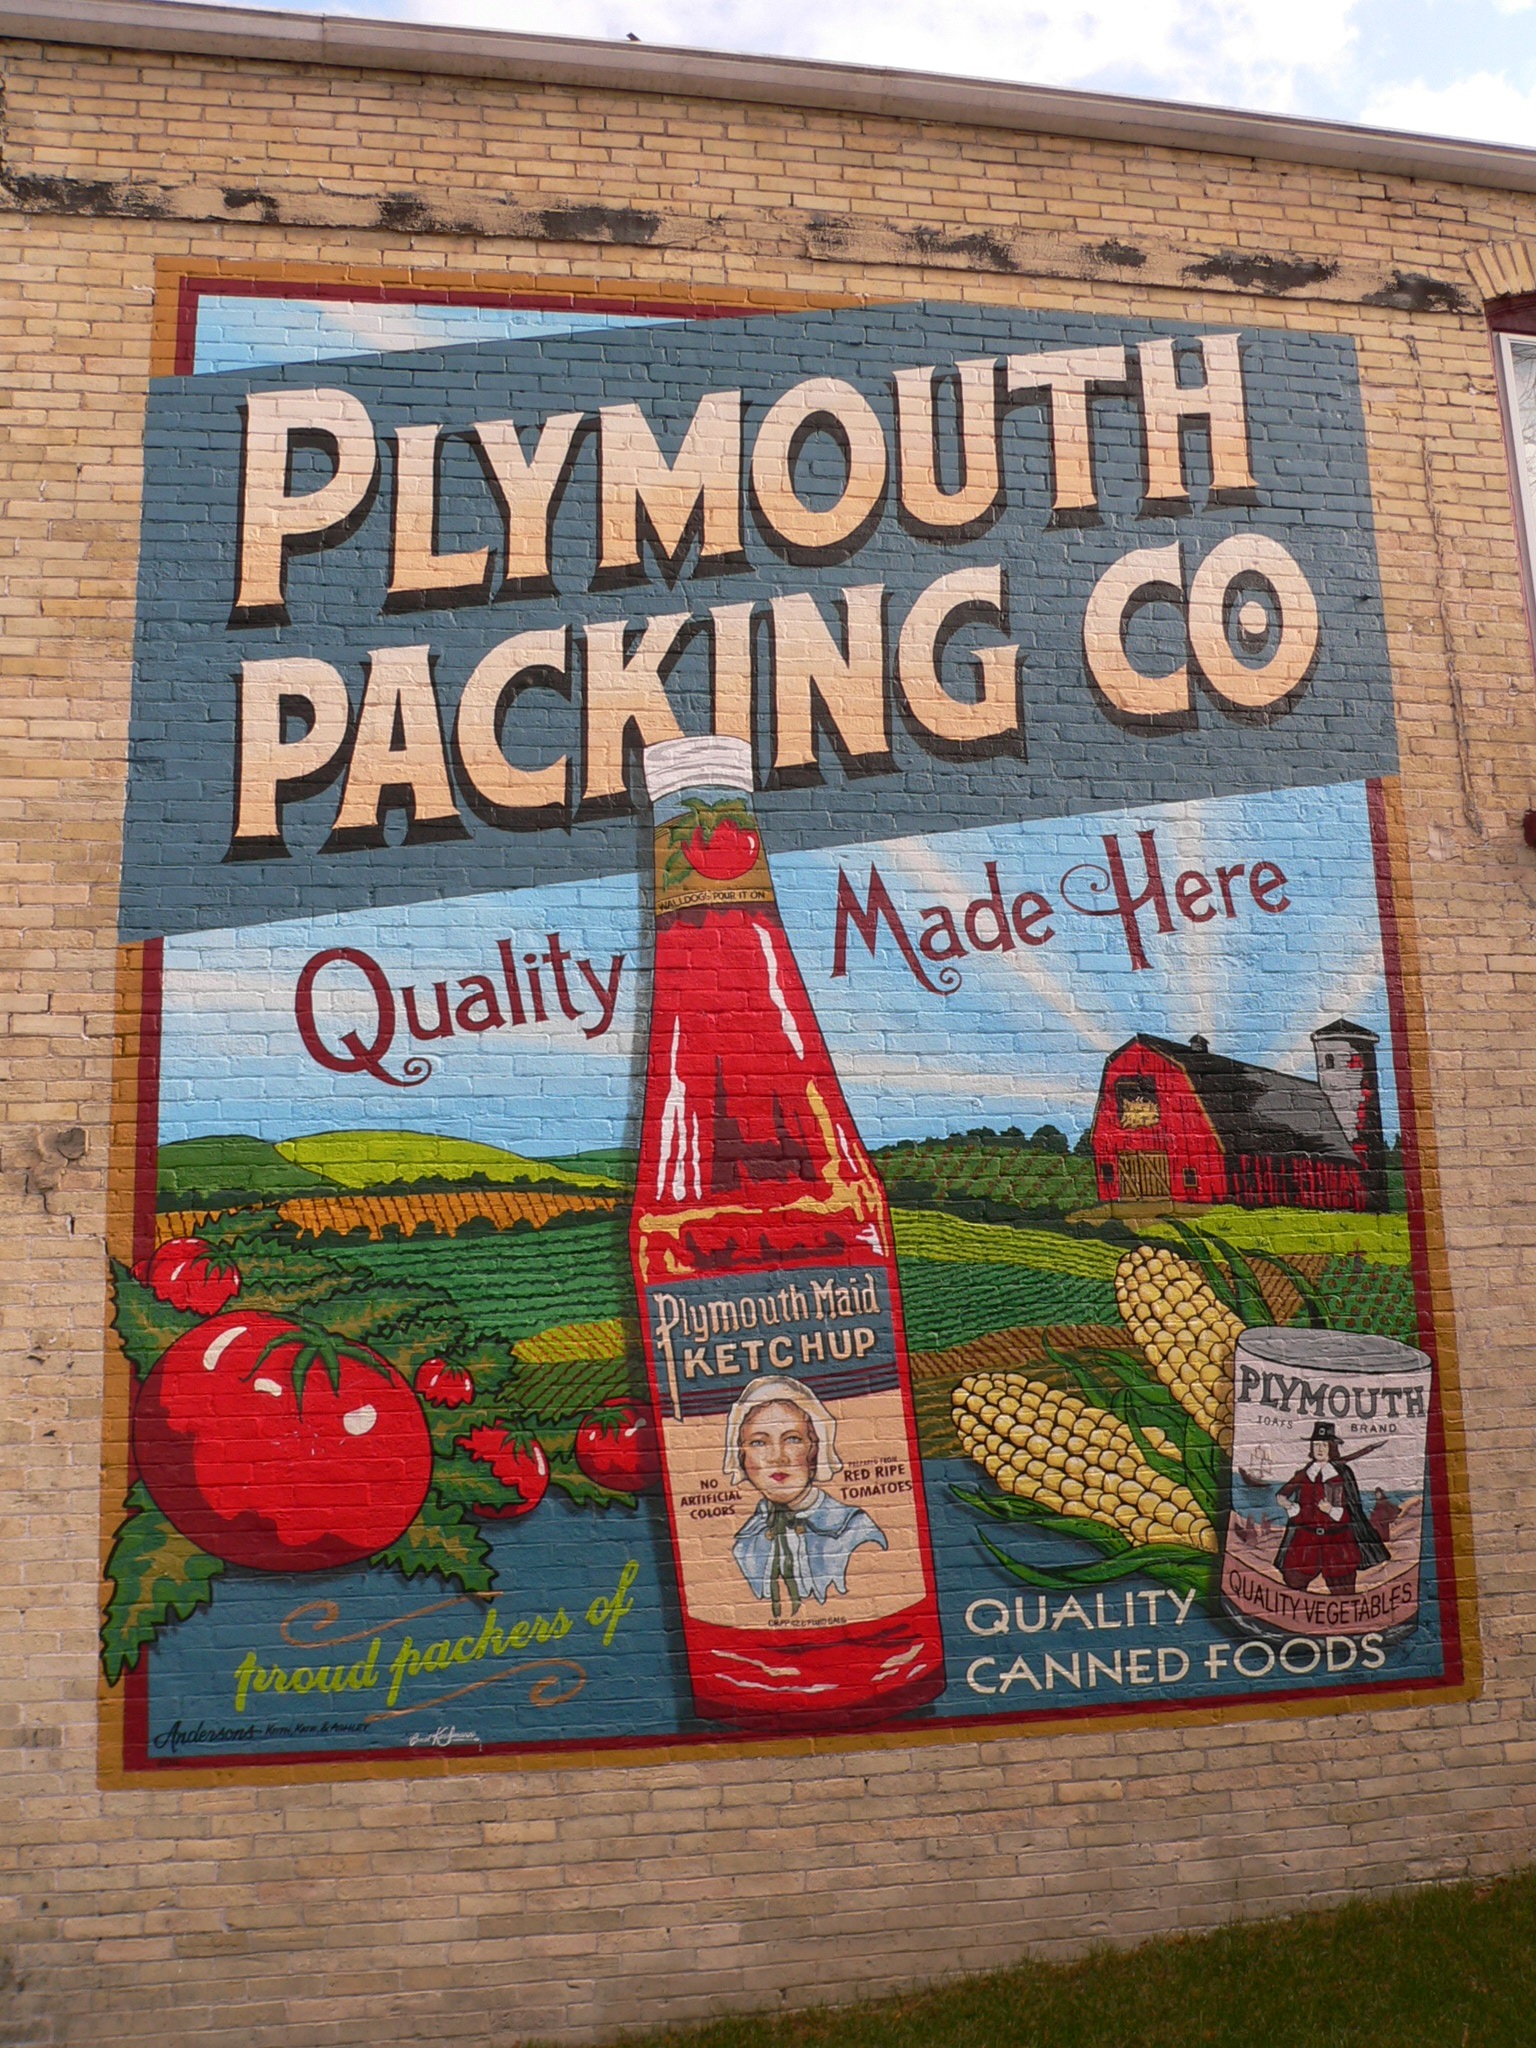 Plymouth Packing Co. Ketchup